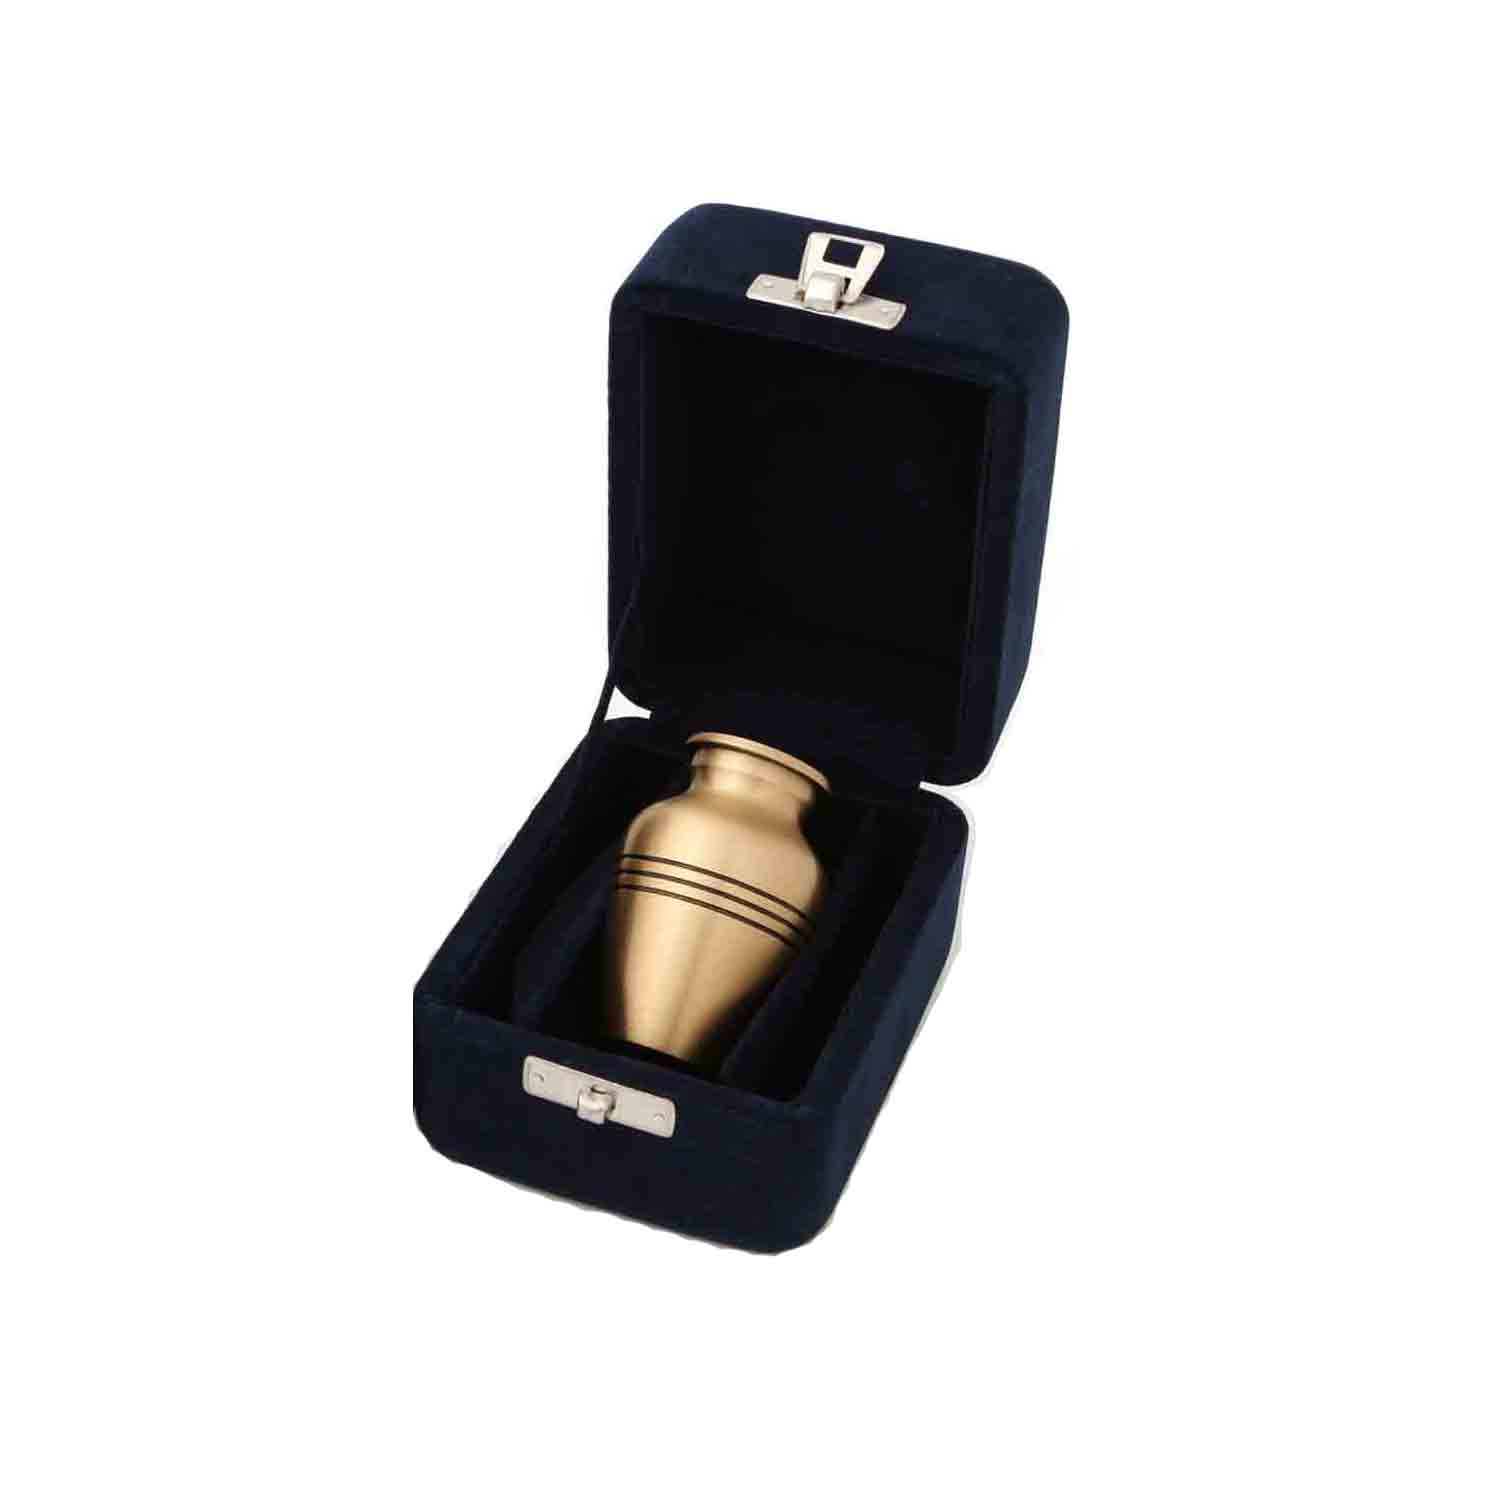 Brass Classic Ashes Keepsake with Bronze Finish with in Presentation Box